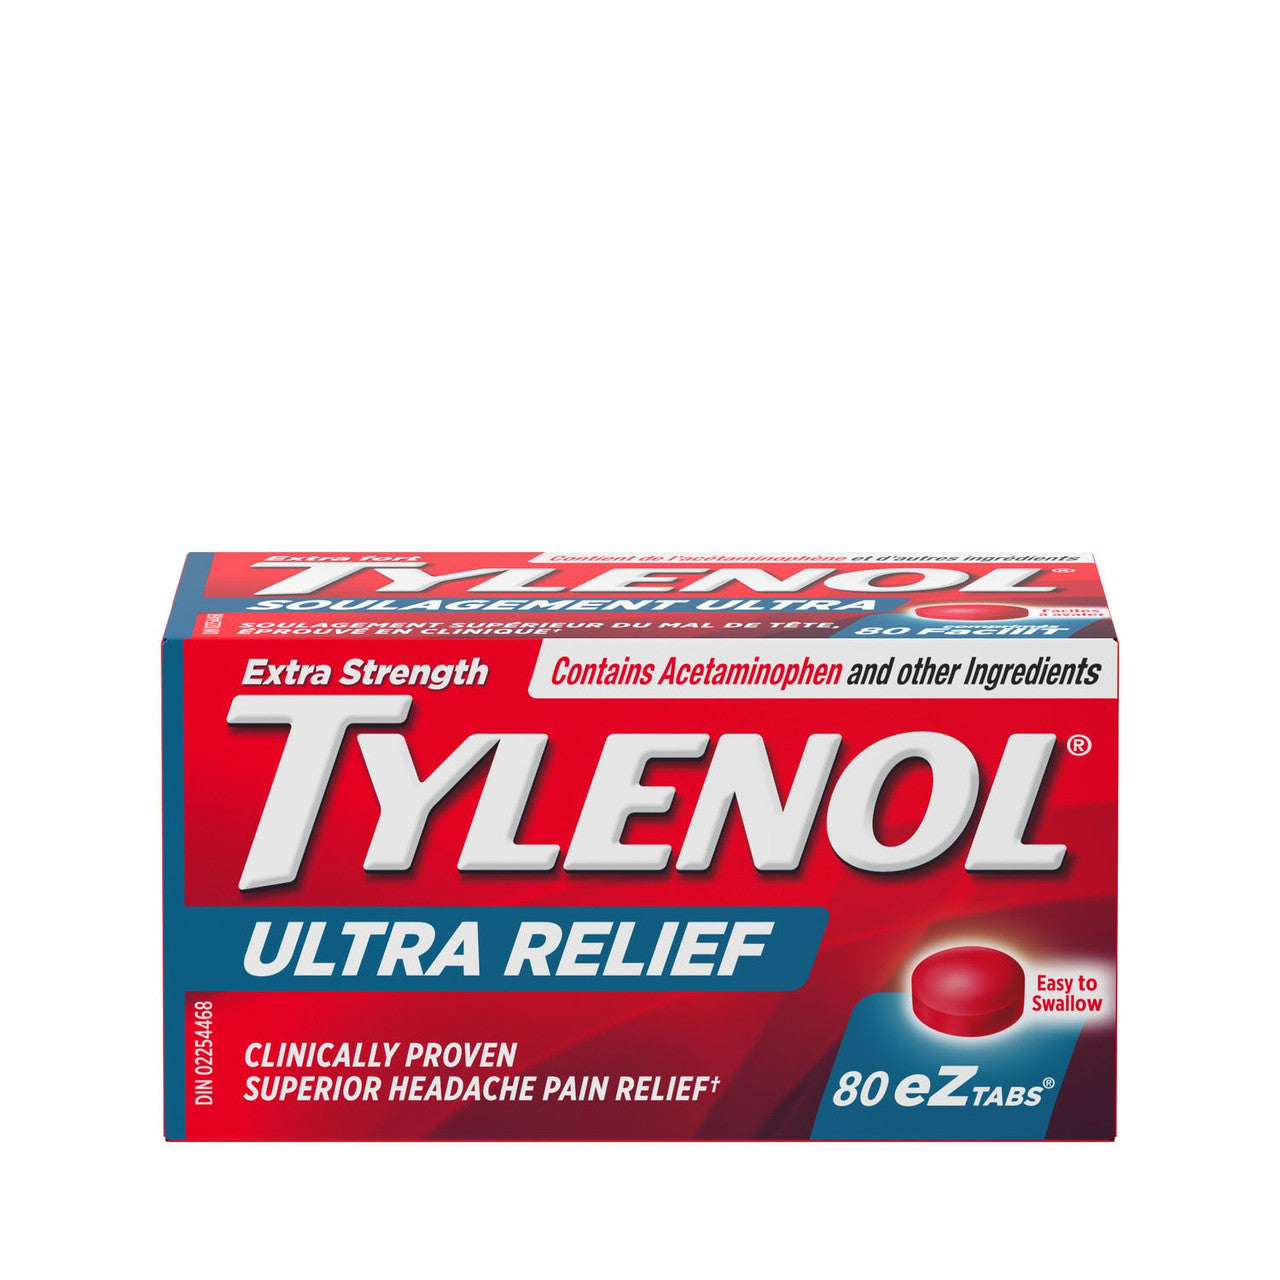 Tylenol Extra Strength Ultra Relief eZ 80 tabs, 500mg Acetaminophen{Imported from Canada}